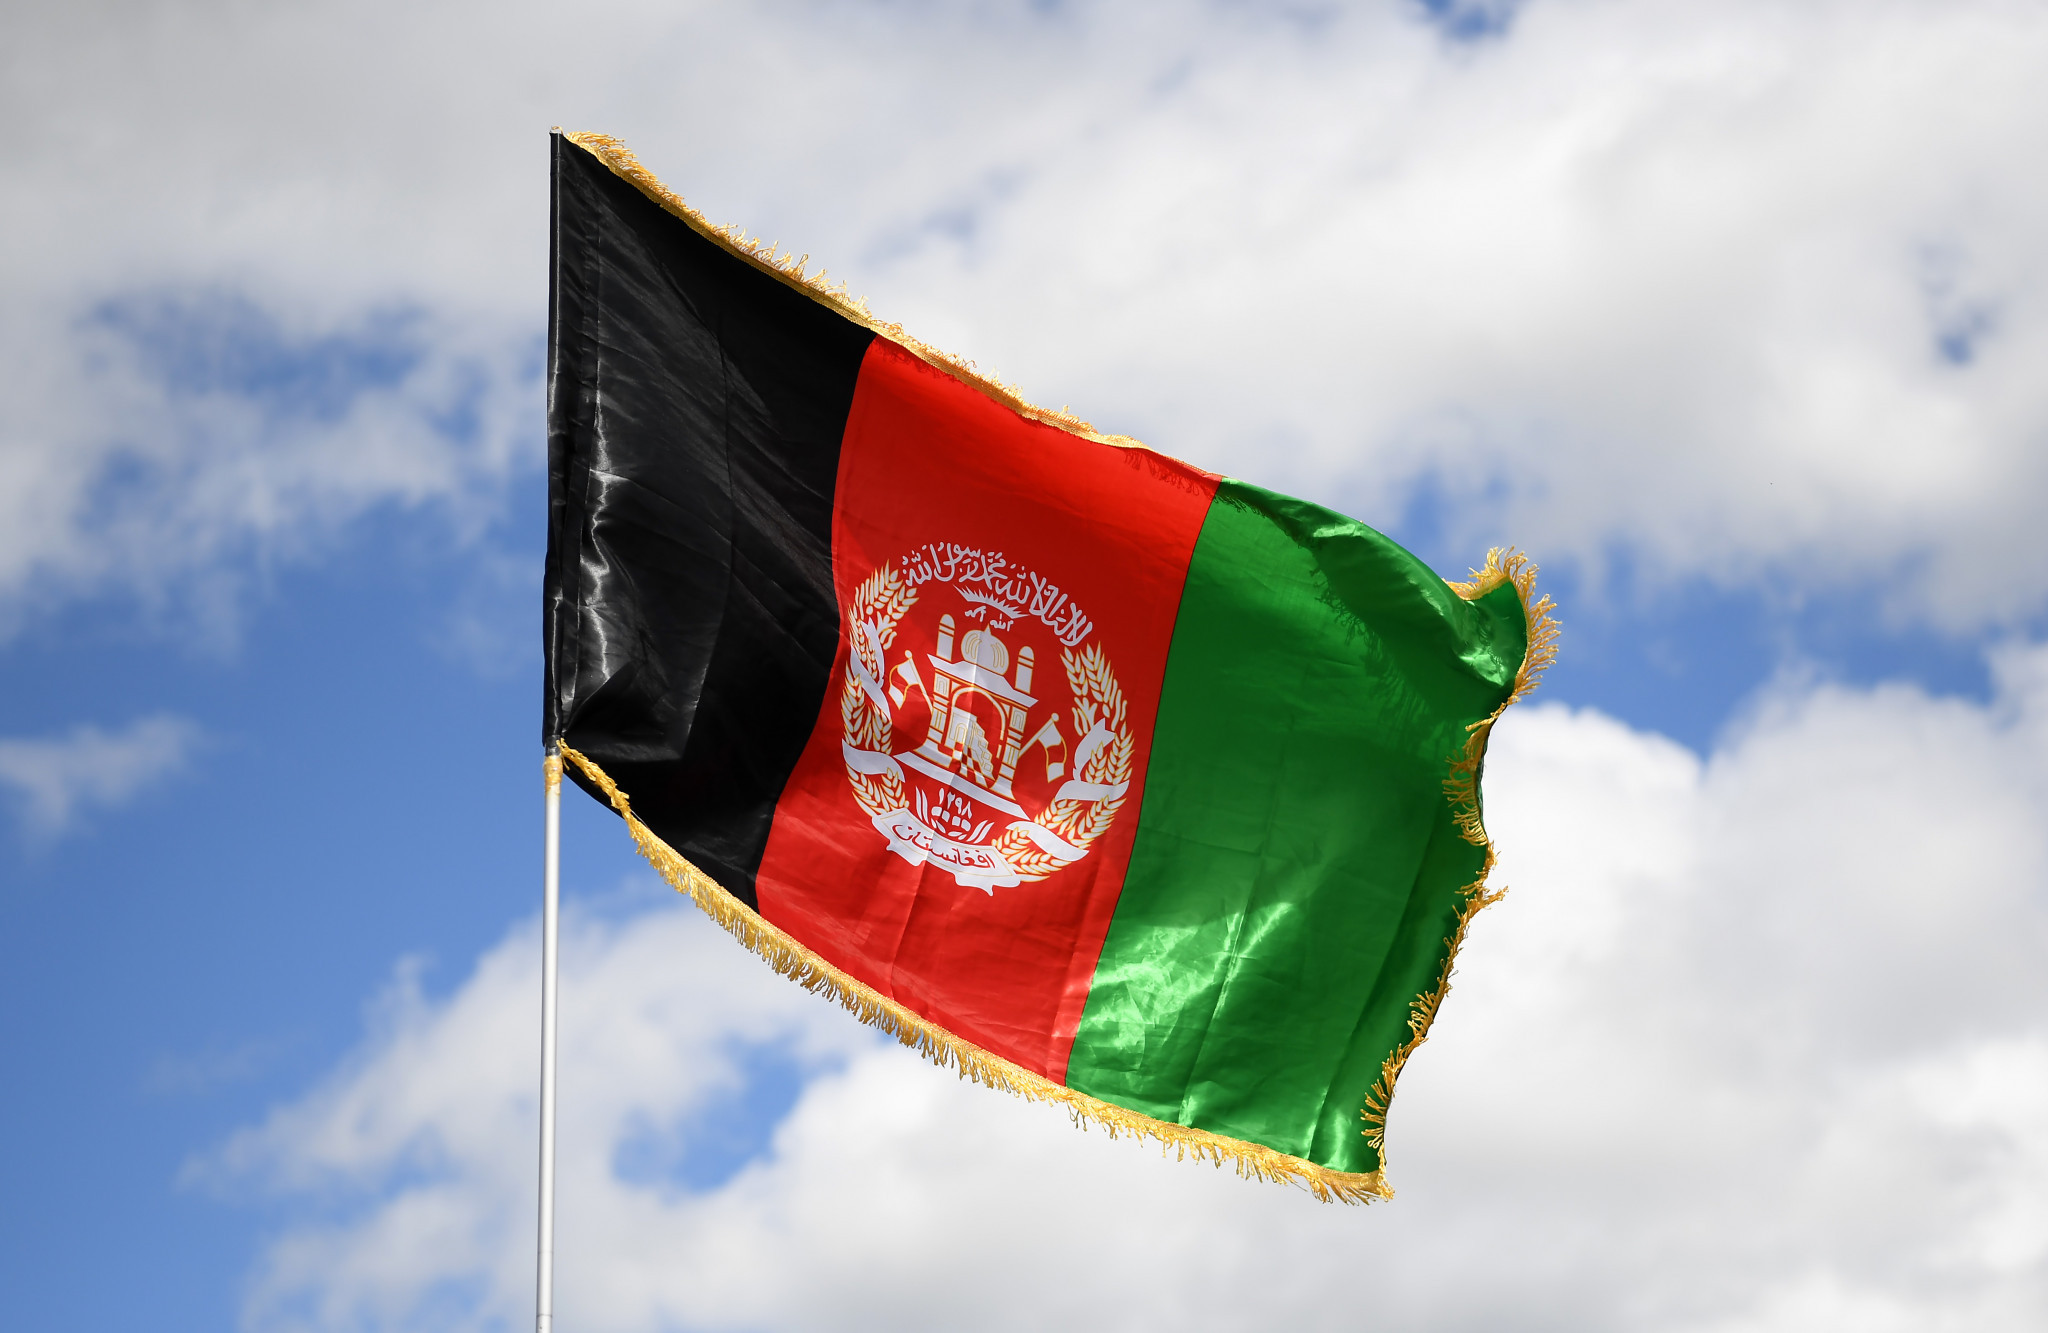 Afghanistan's men's team performed well at the Pakistan Open, under the country's tricolour flag ©Getty Images